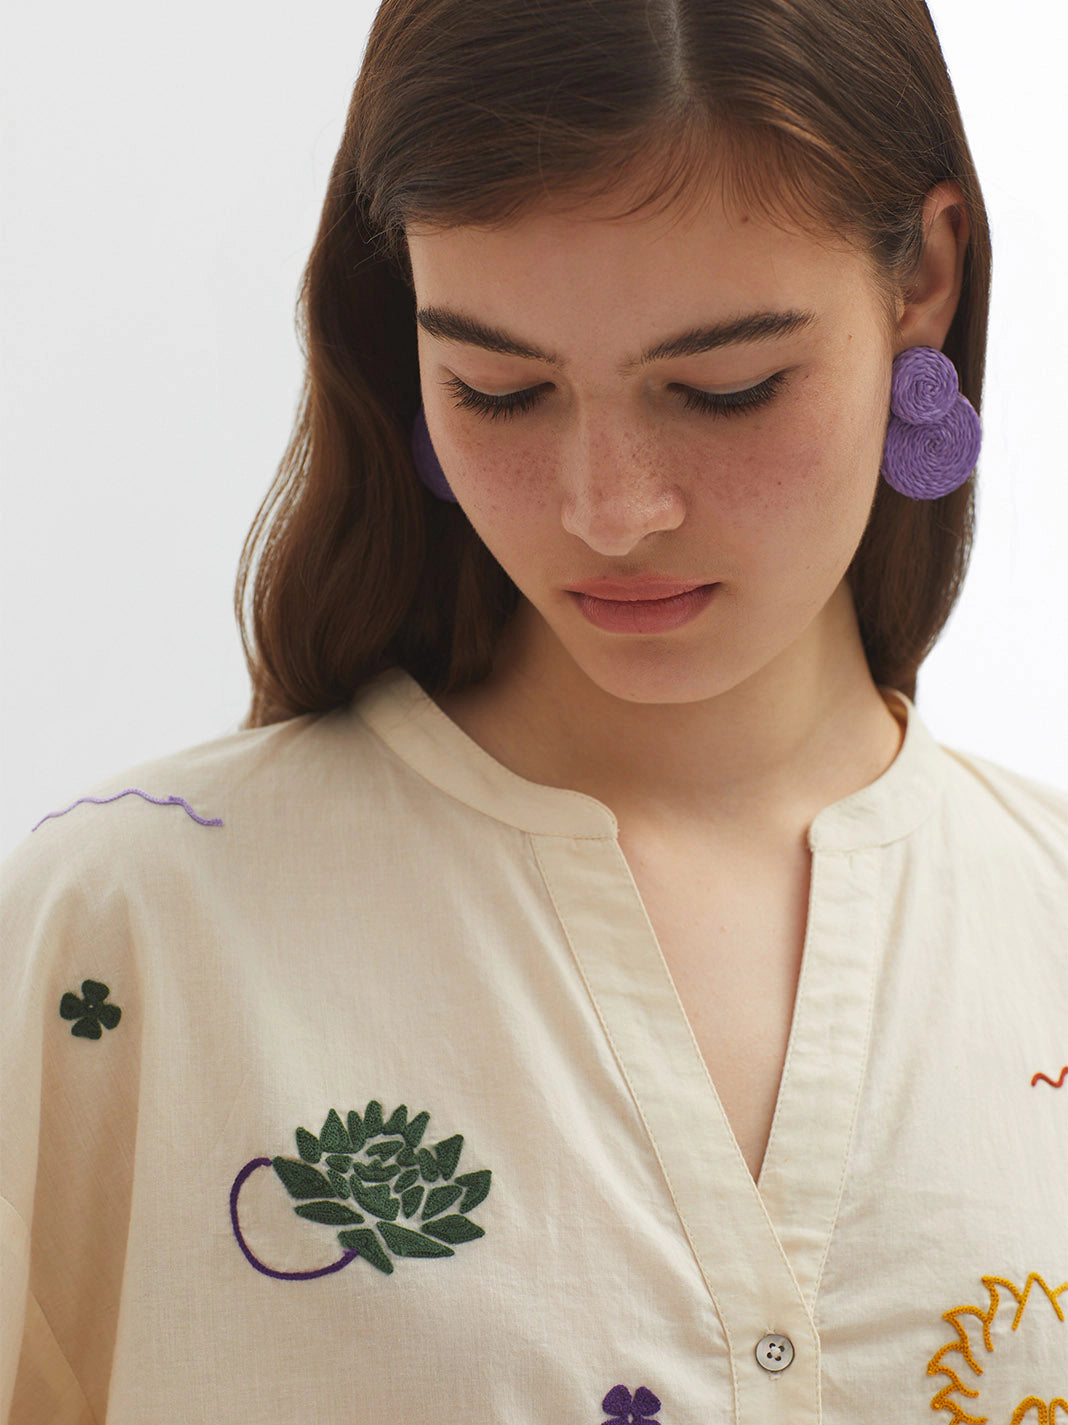 Colored Embroidery Shirt